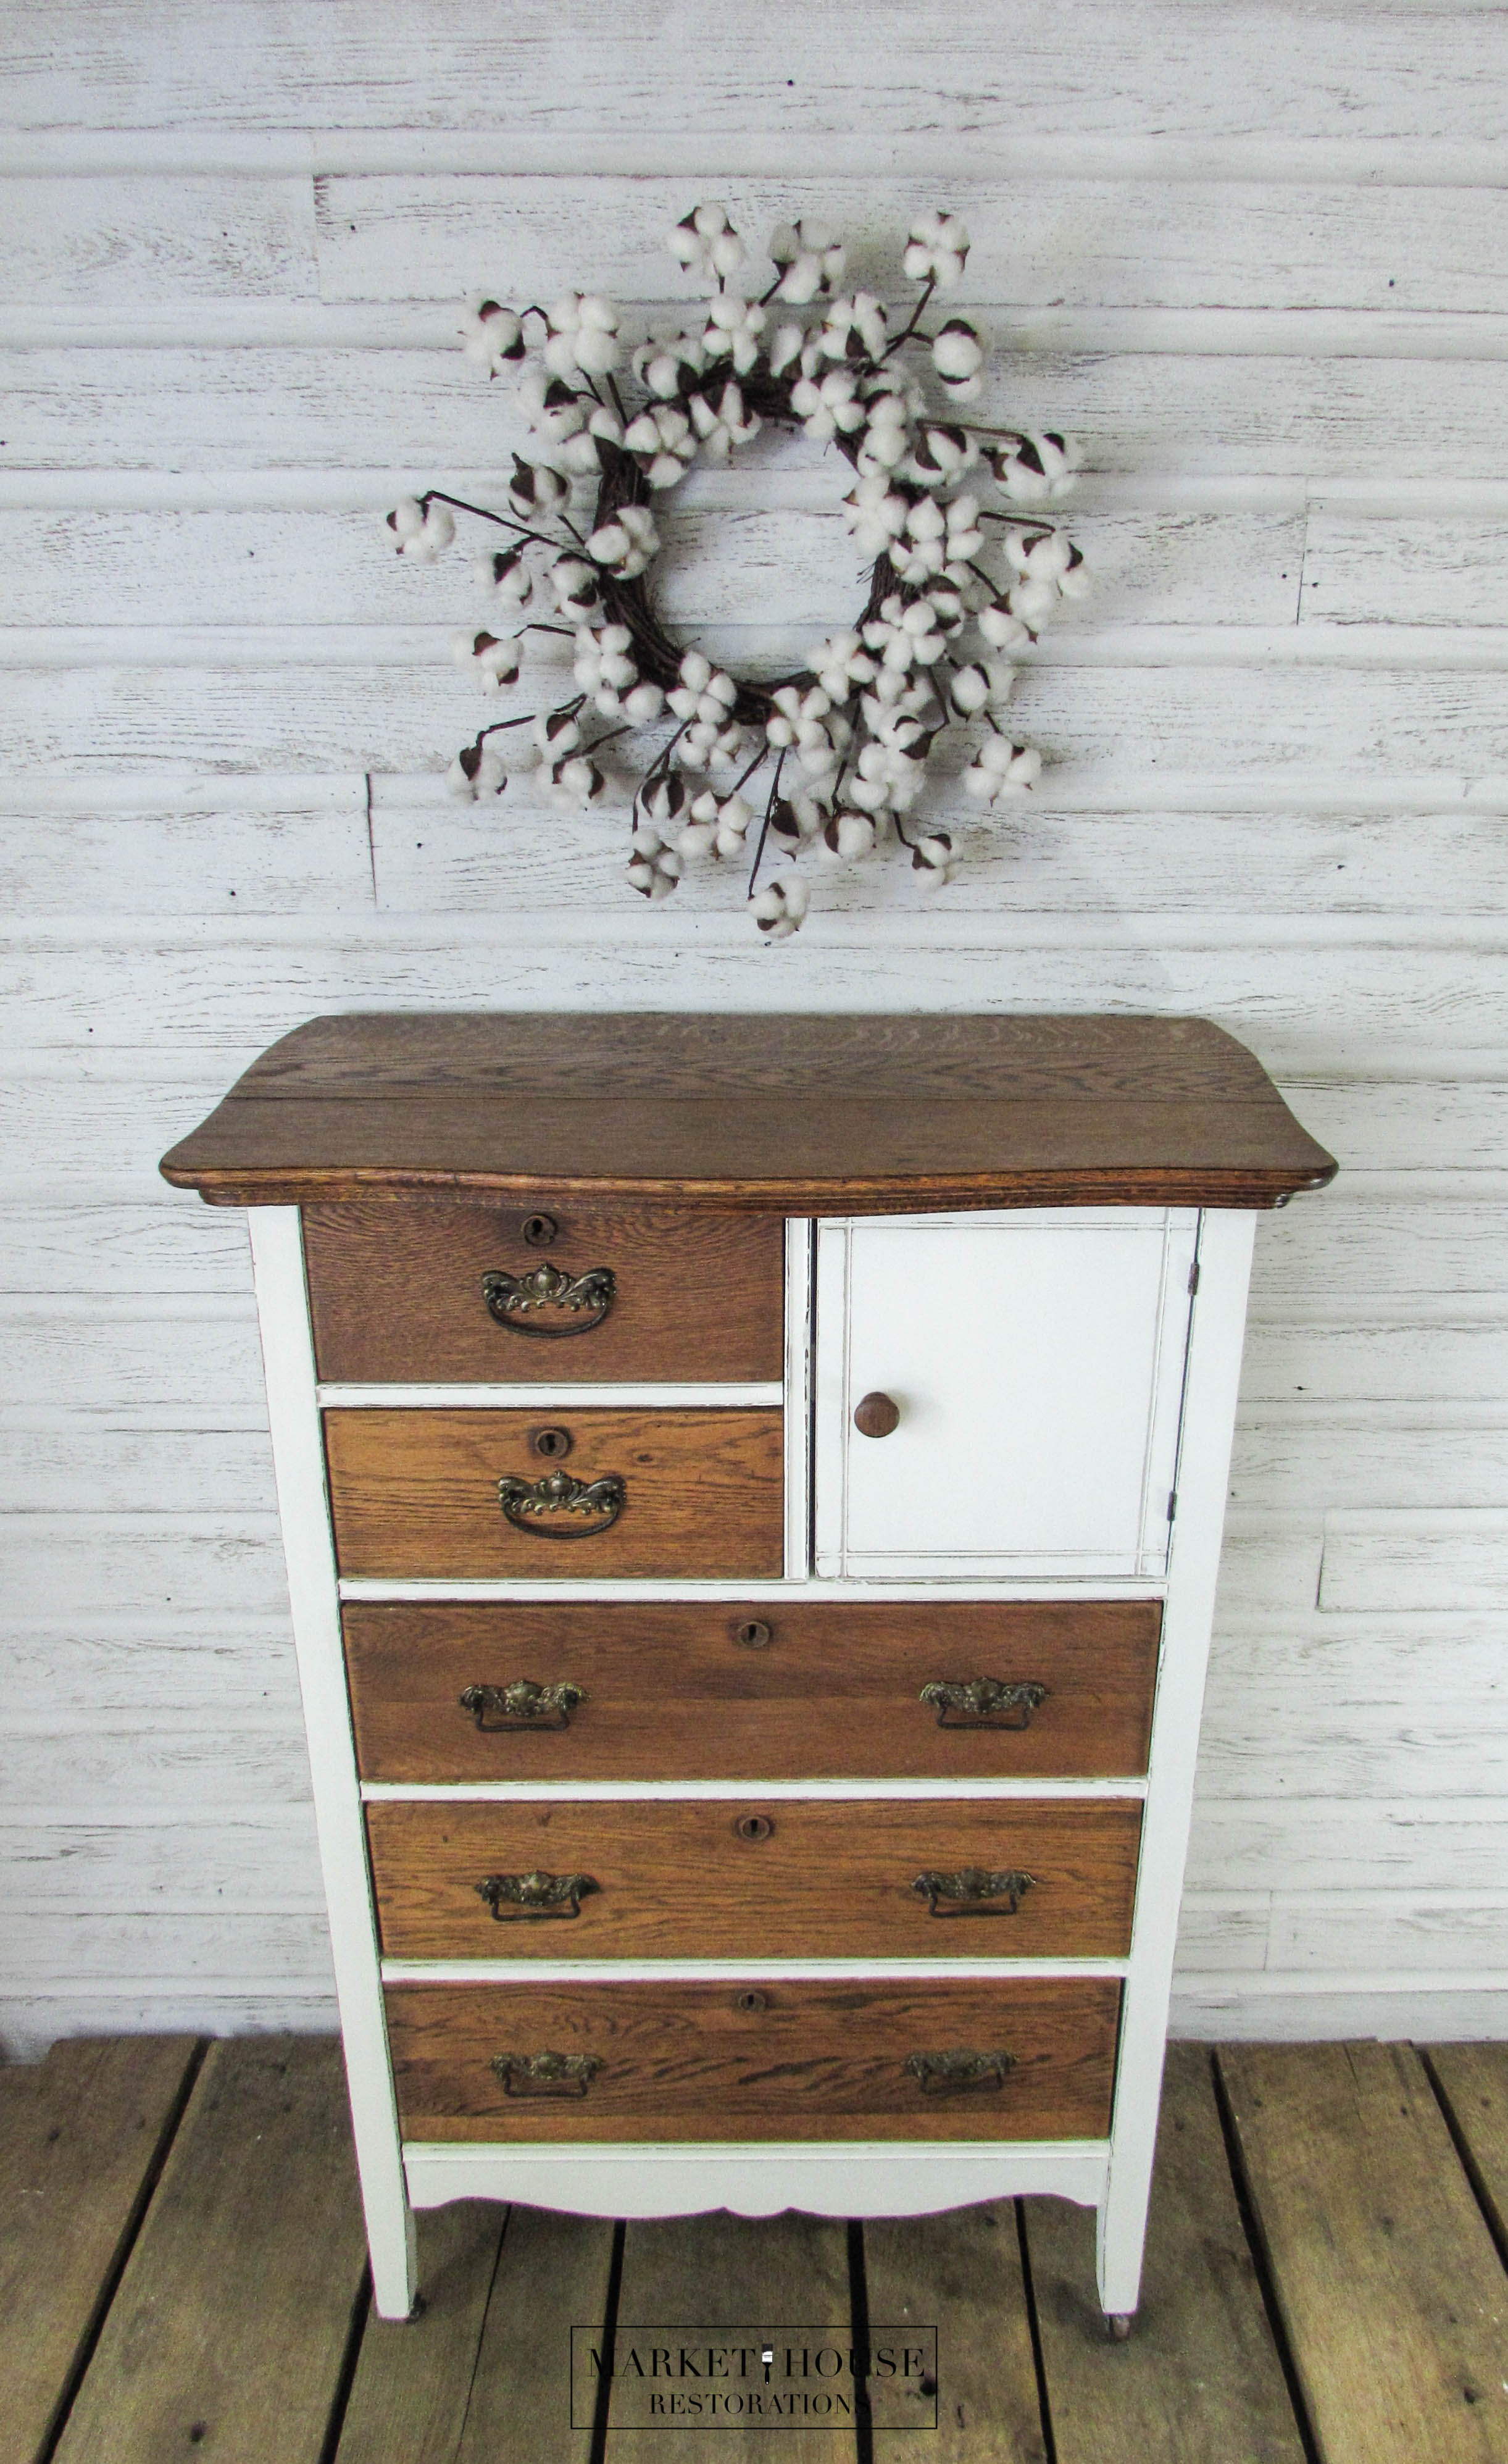 Sold Oak 2 Tone Chest Of Drawers With Hat Box Market House